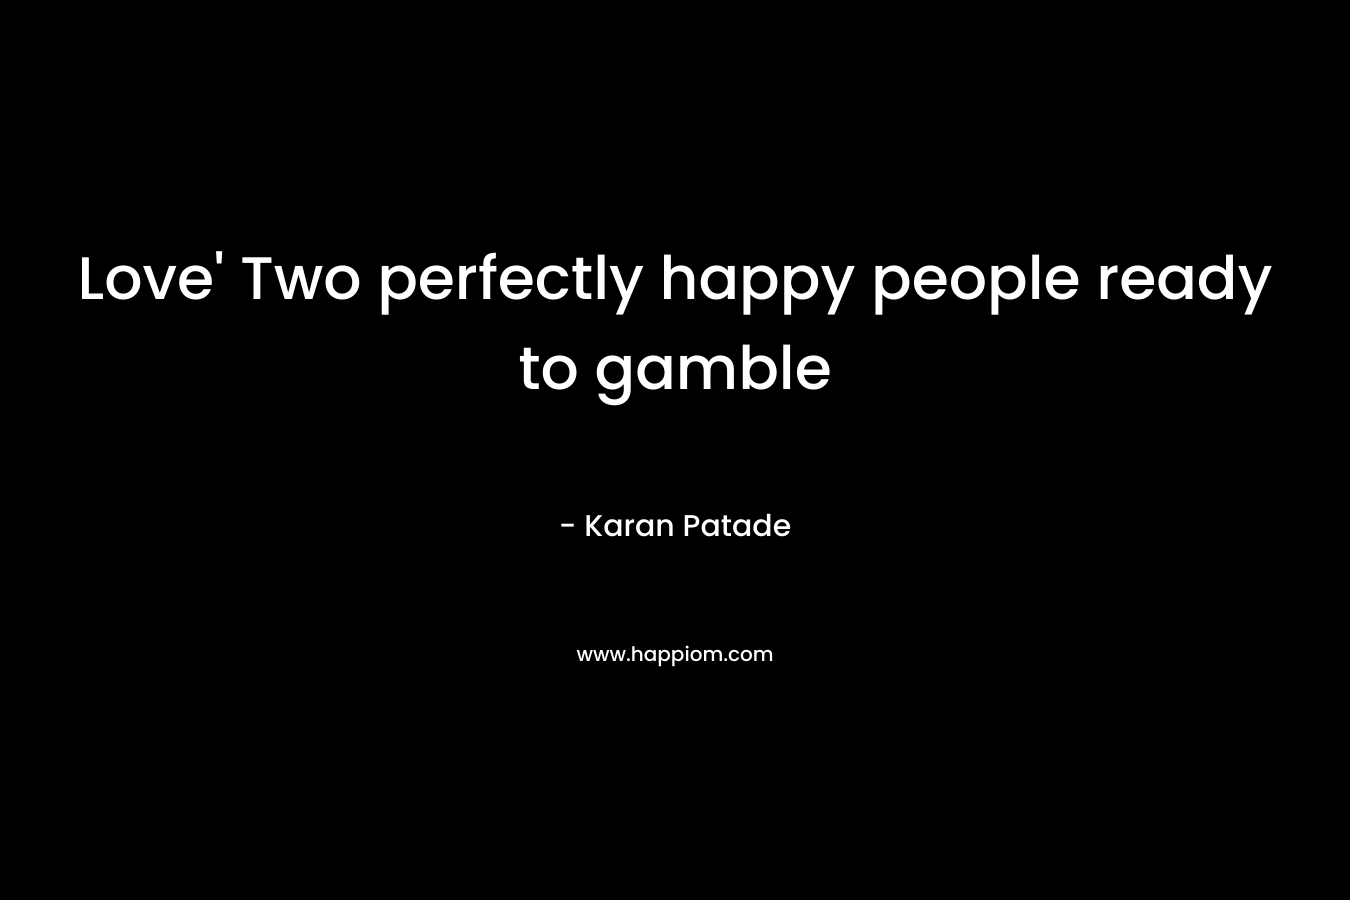 Love' Two perfectly happy people ready to gamble